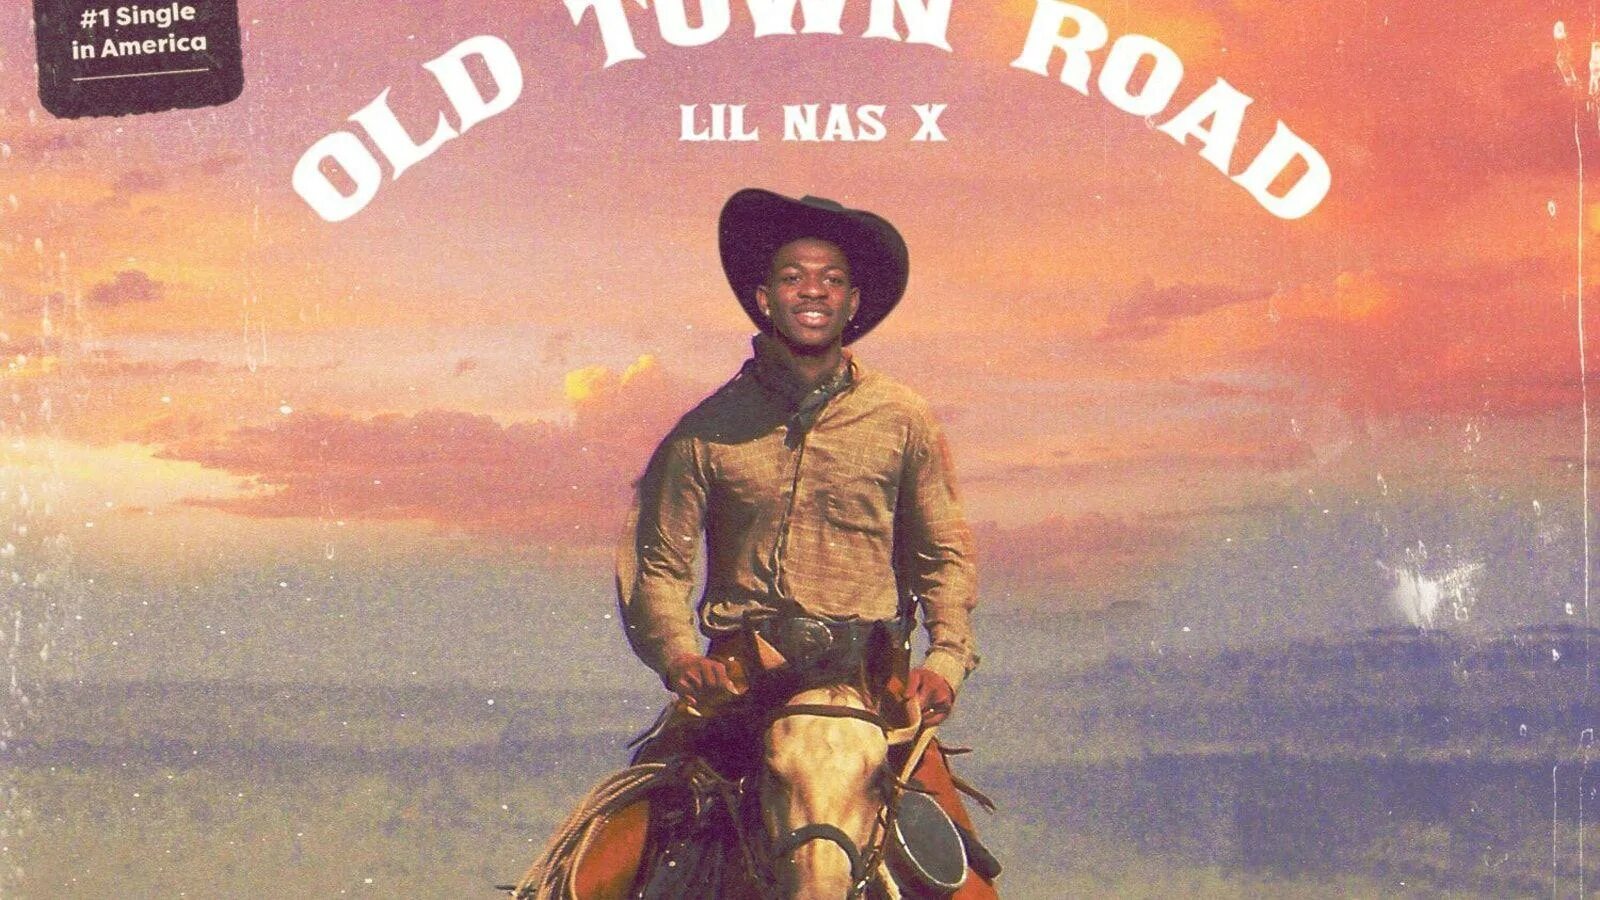 Old town remix. Lil nas x old Town Road. Old Town обложка. Old Town Road Lil nas x Billy ray Cyrus обложка.